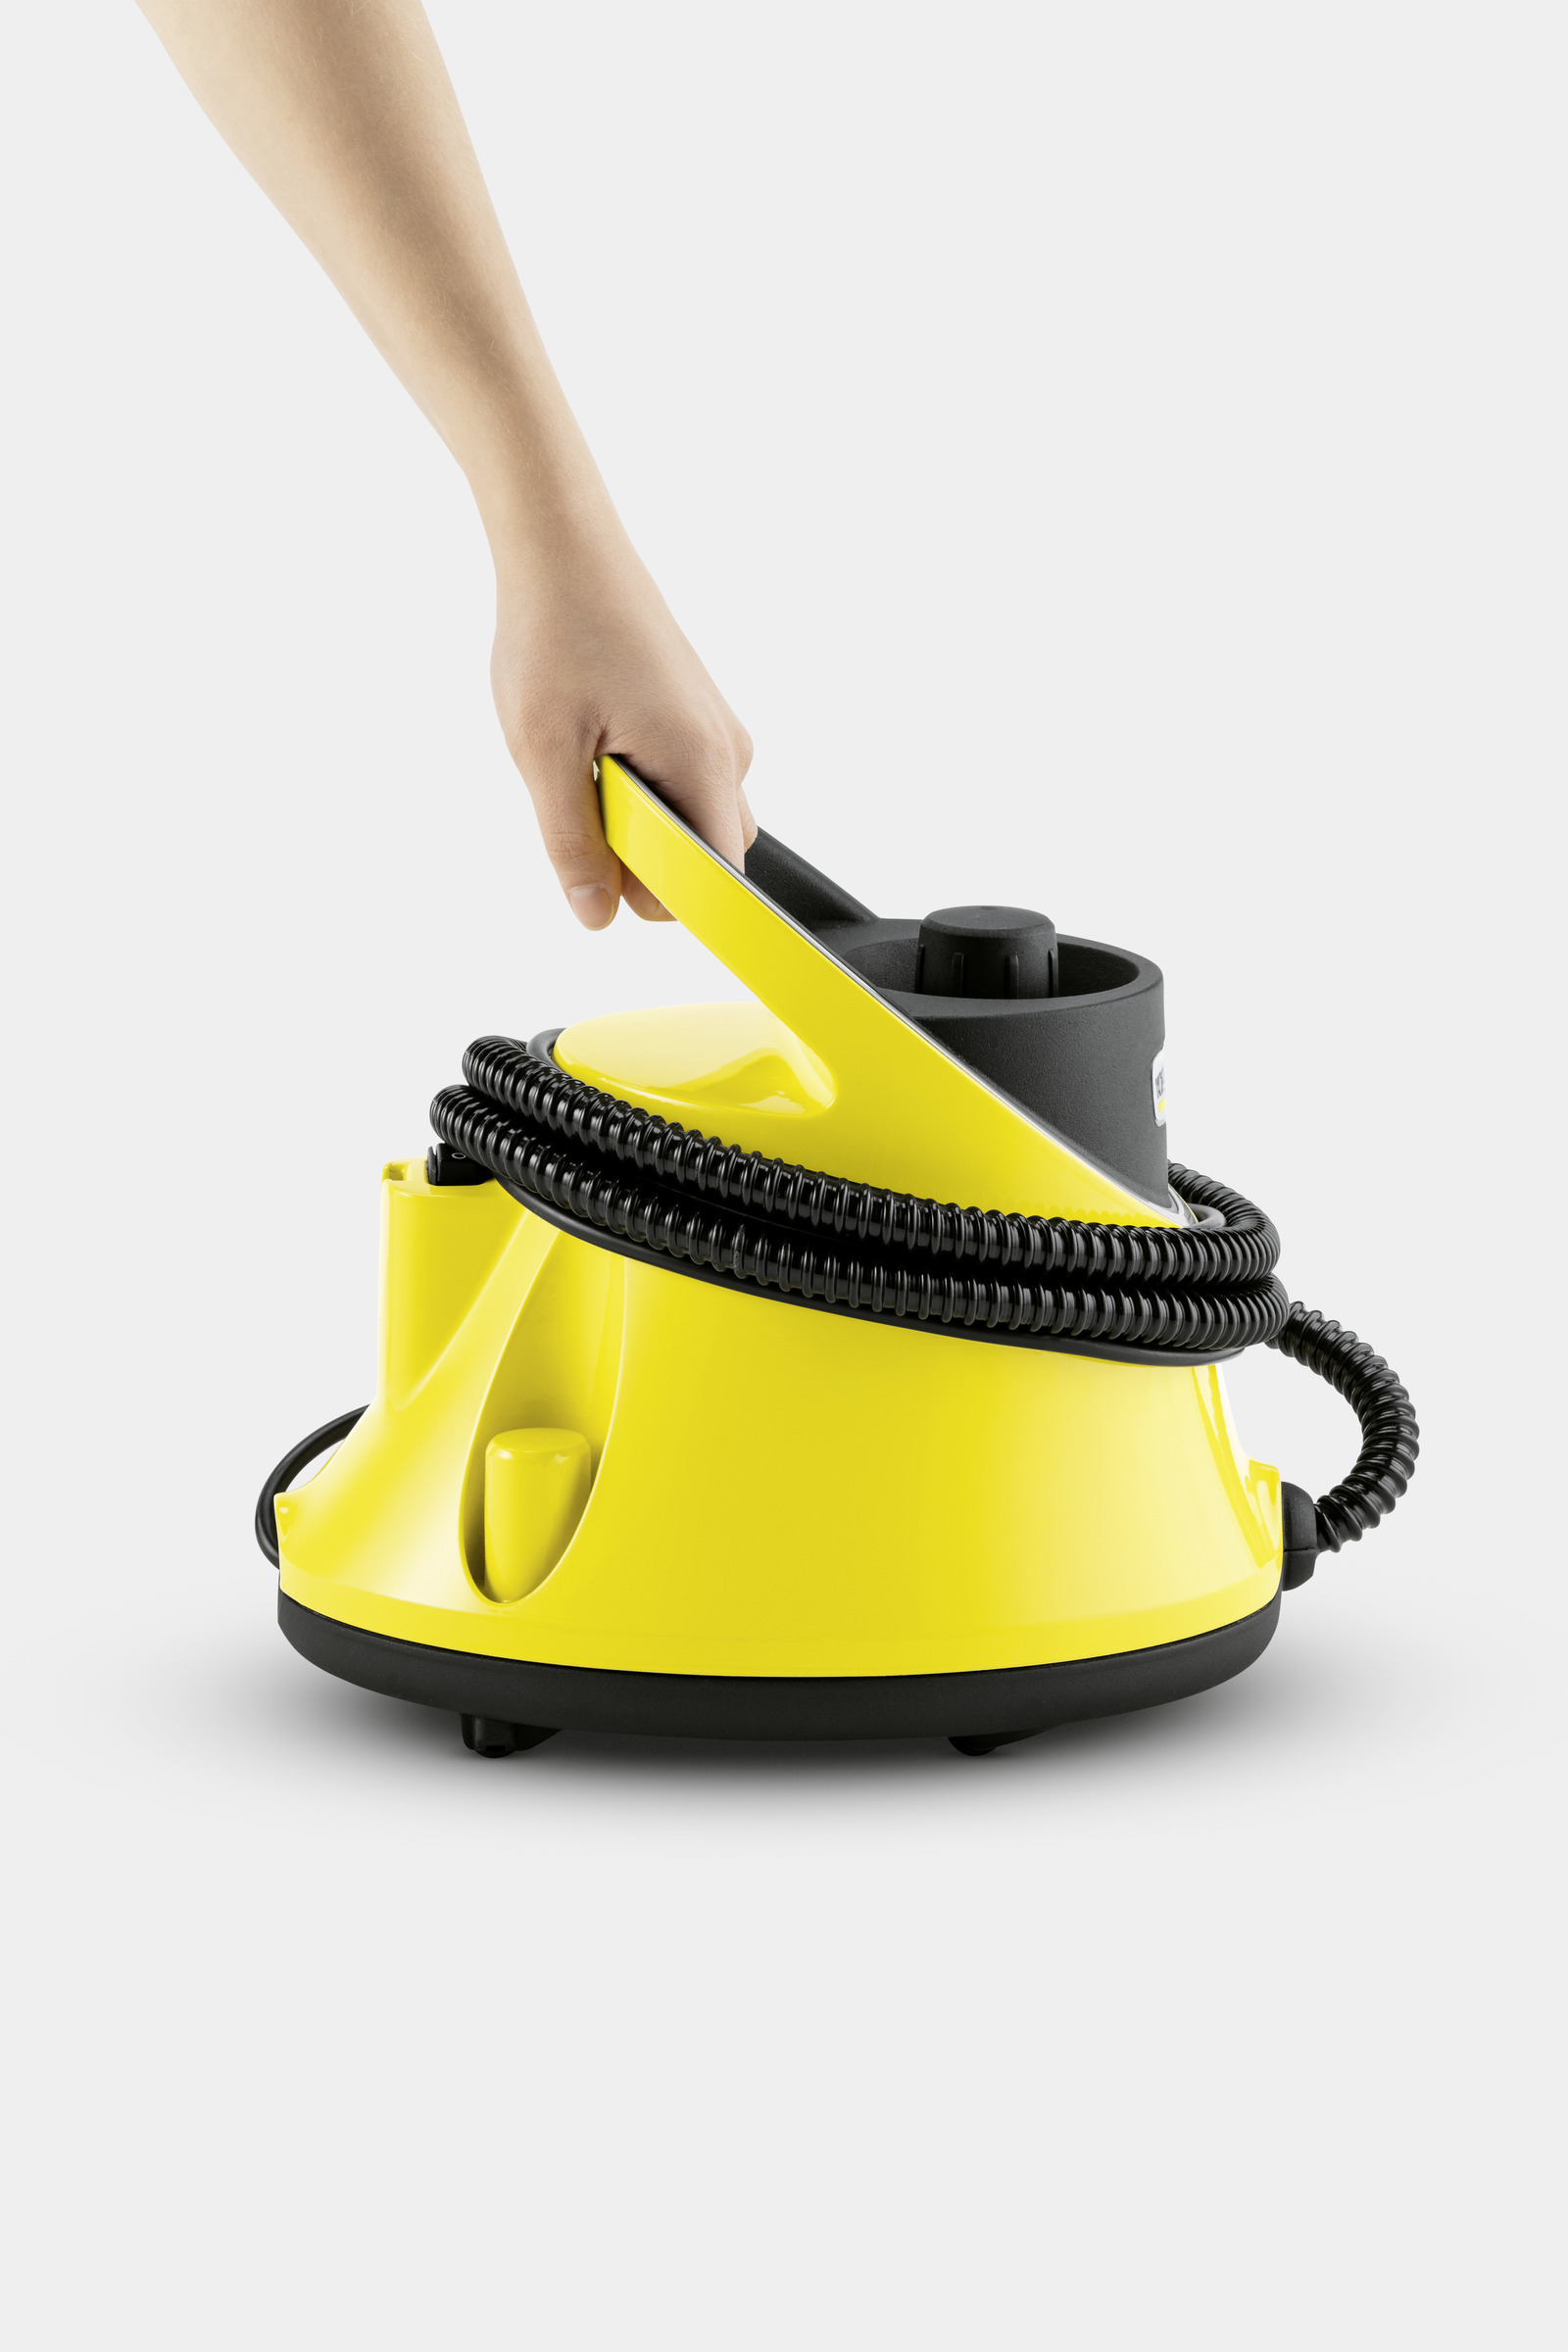 Karcher SC2 Steamer - Buy Direct at a great price Just £121.48